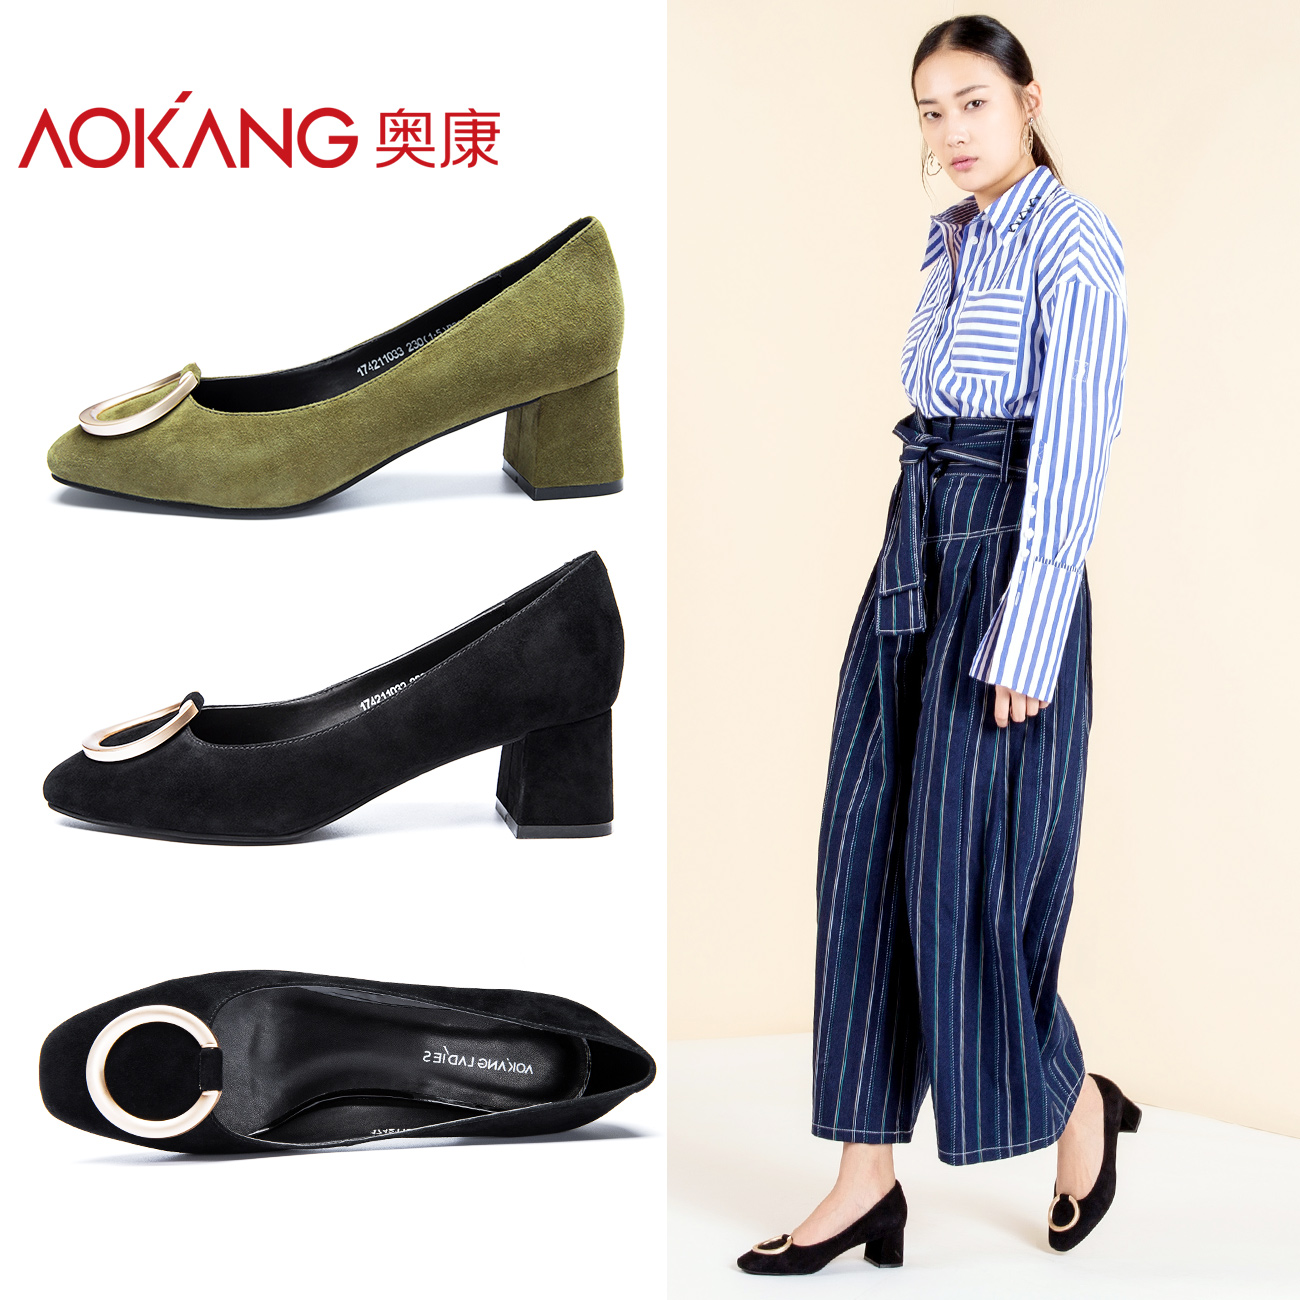 Aokang women's shoes new shallow mouth square head with anti-velvet metal buckle fashion urban high heel women's shoes